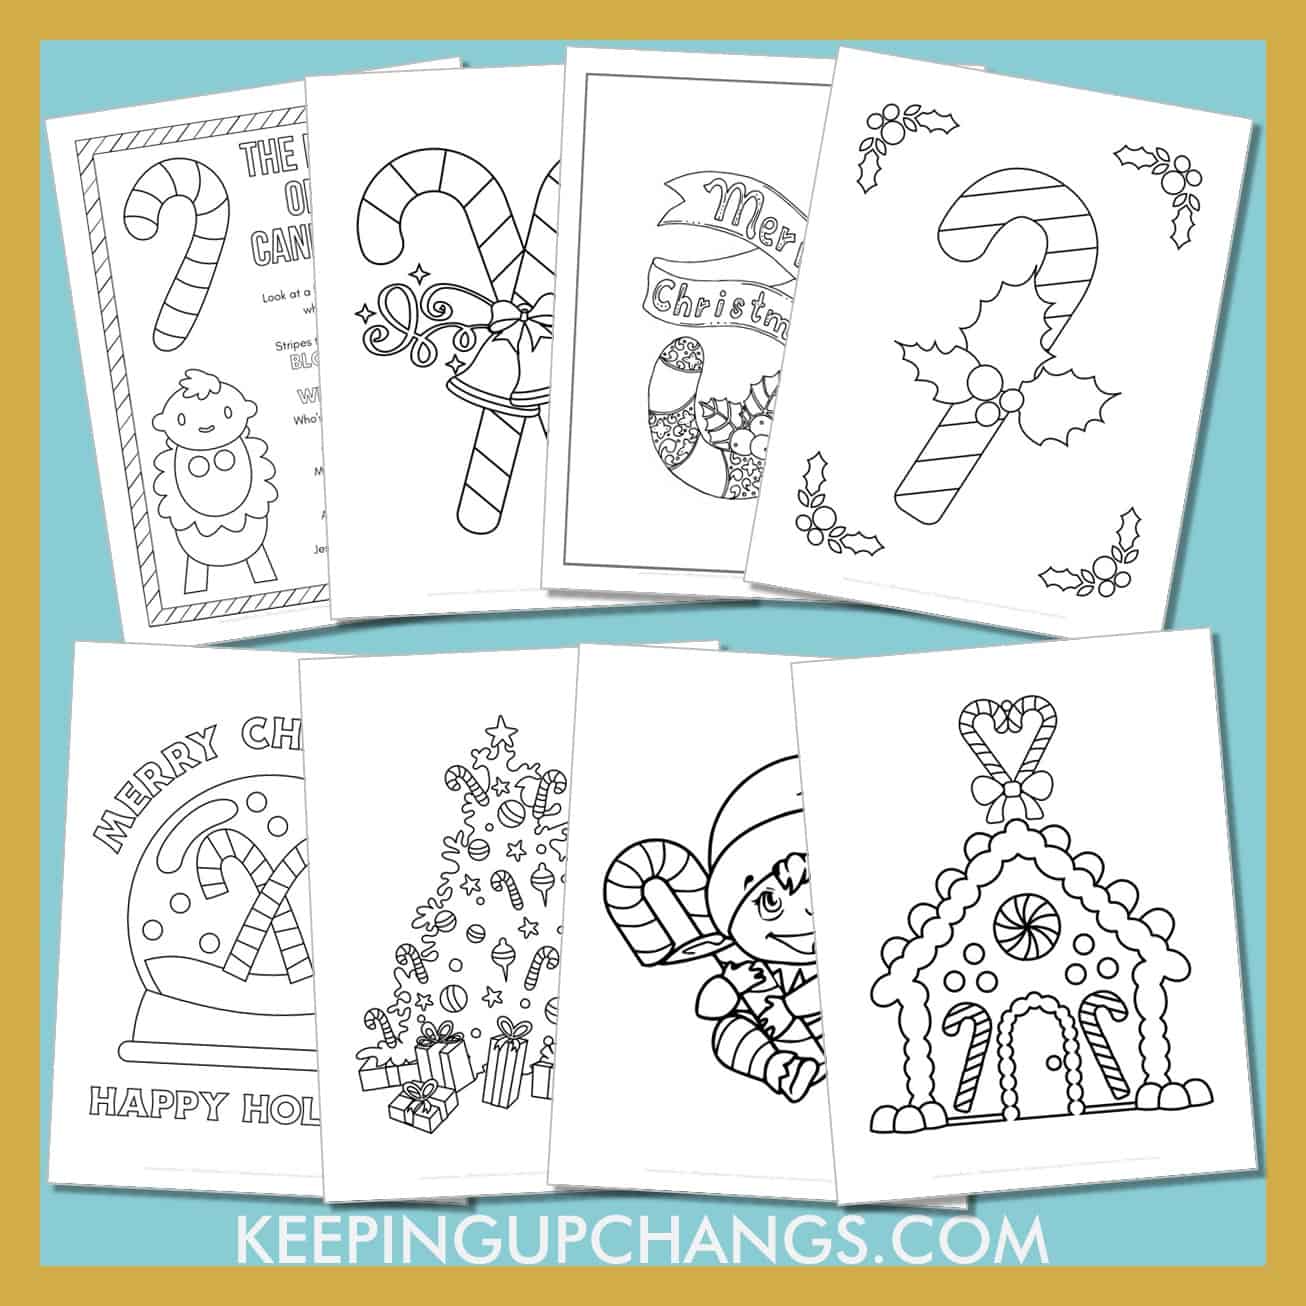 free candy cane colouring sheets including cute, easy, simple and detailed winter christmas designs.